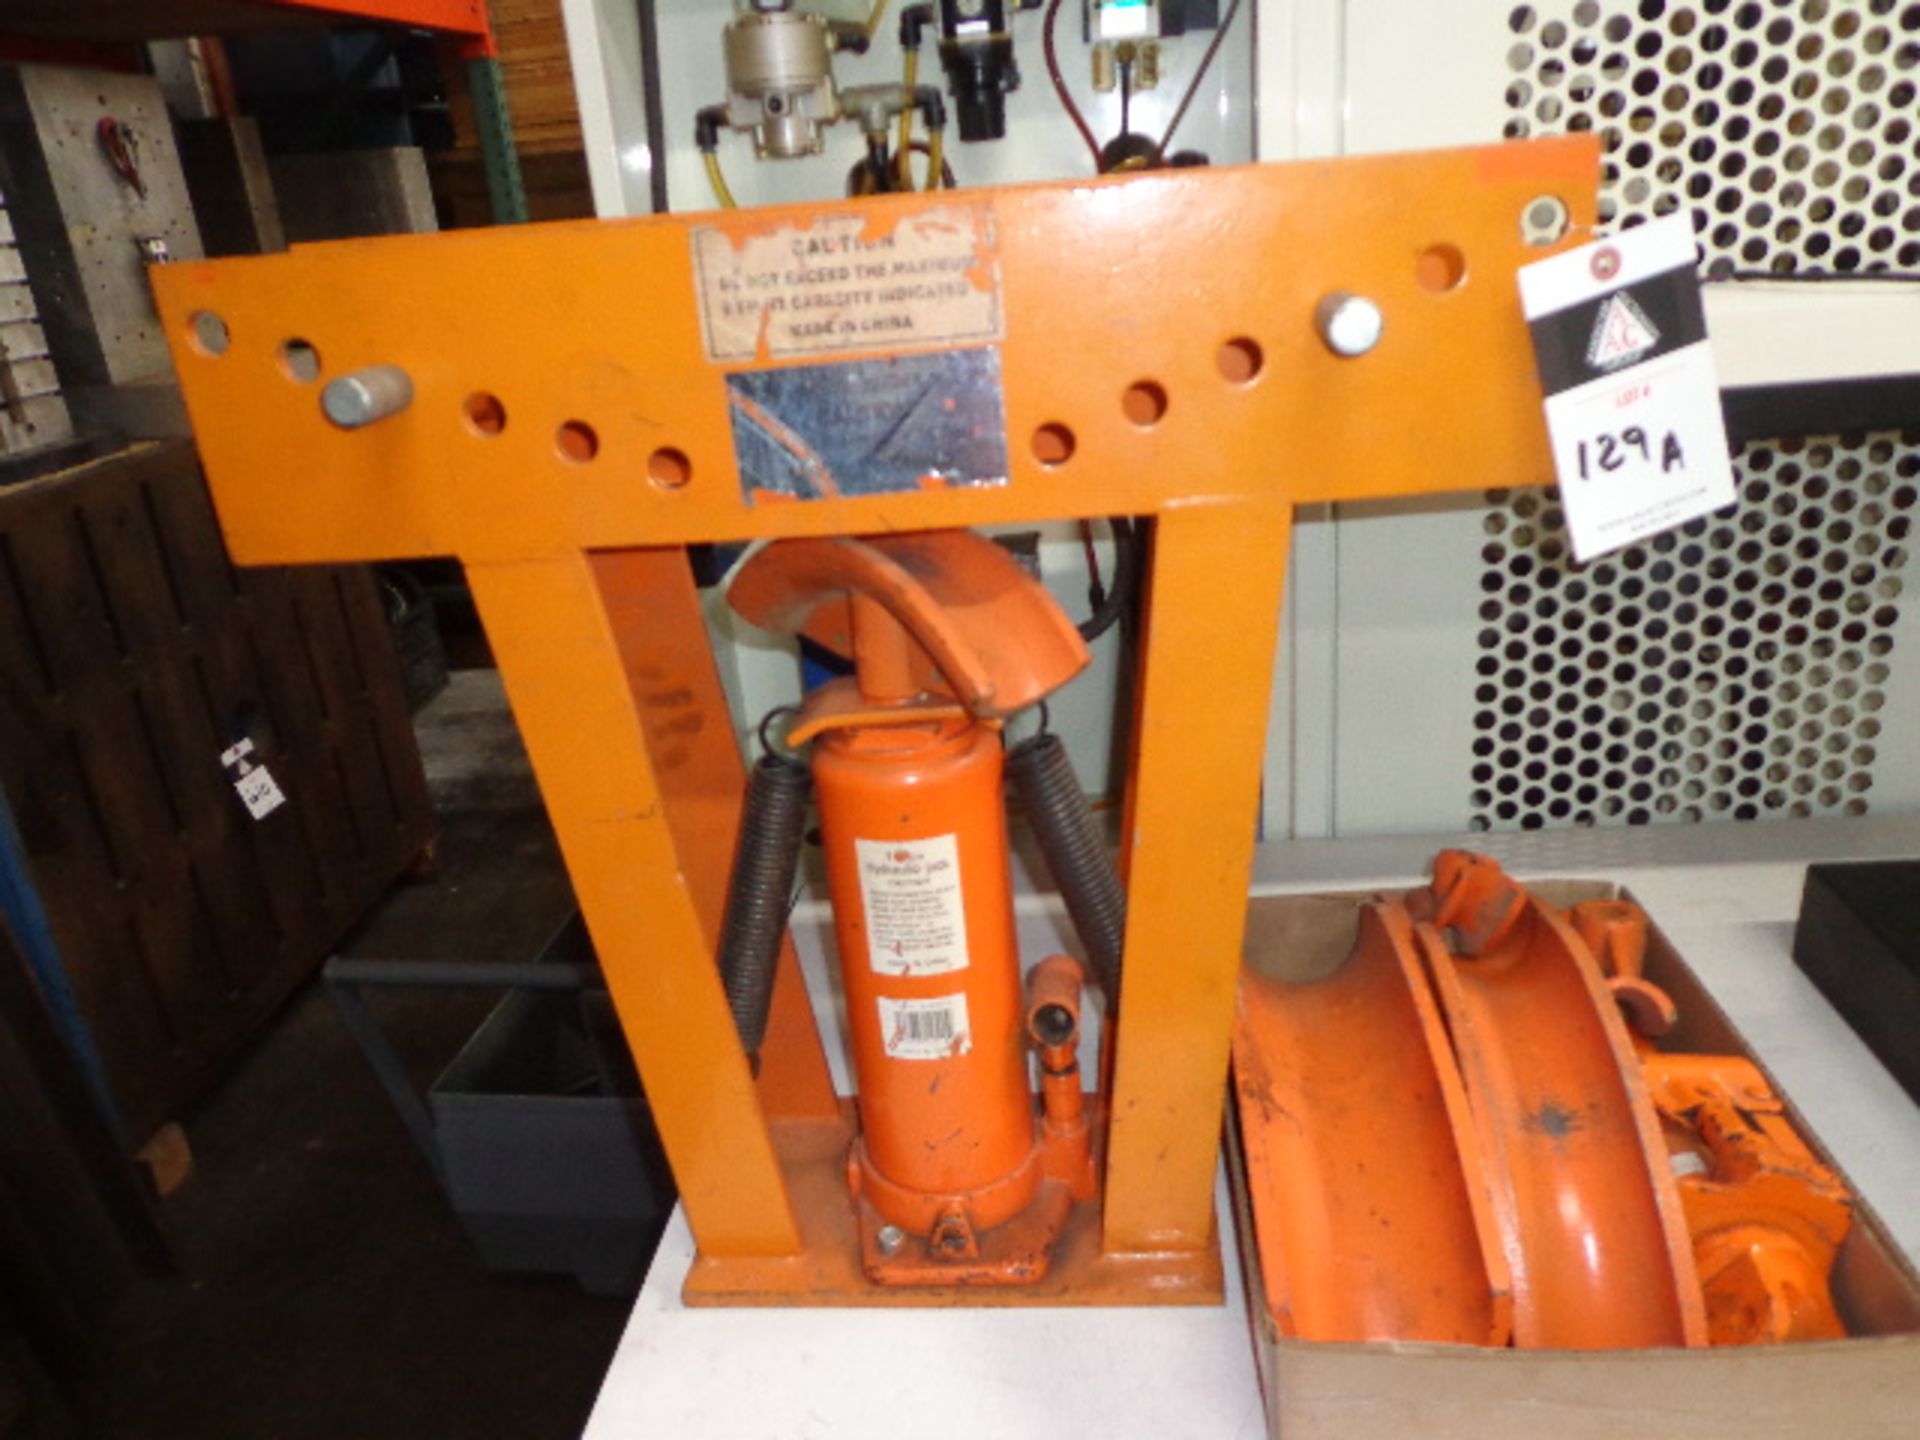 10 Ton Hydraulic Pipe Bender (SOLD AS-IS - NO WARRANTY) - Image 2 of 3